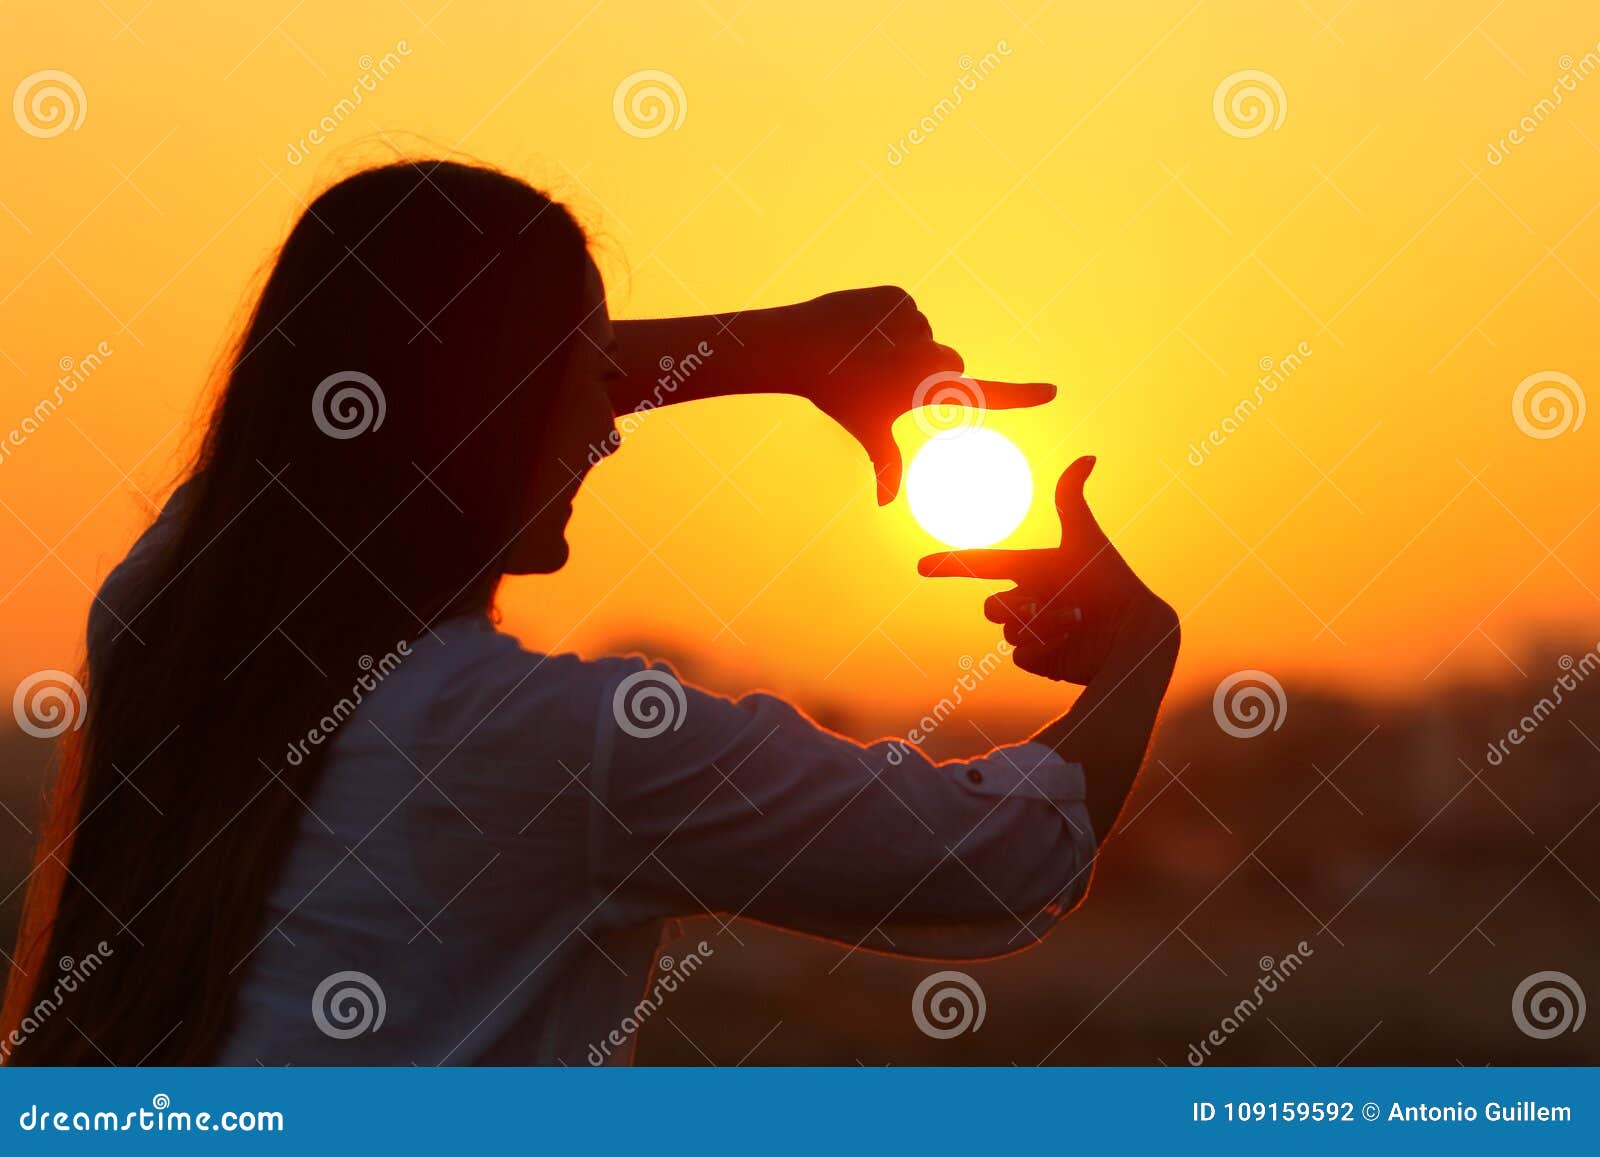 woman framing sun with fingers at sunset